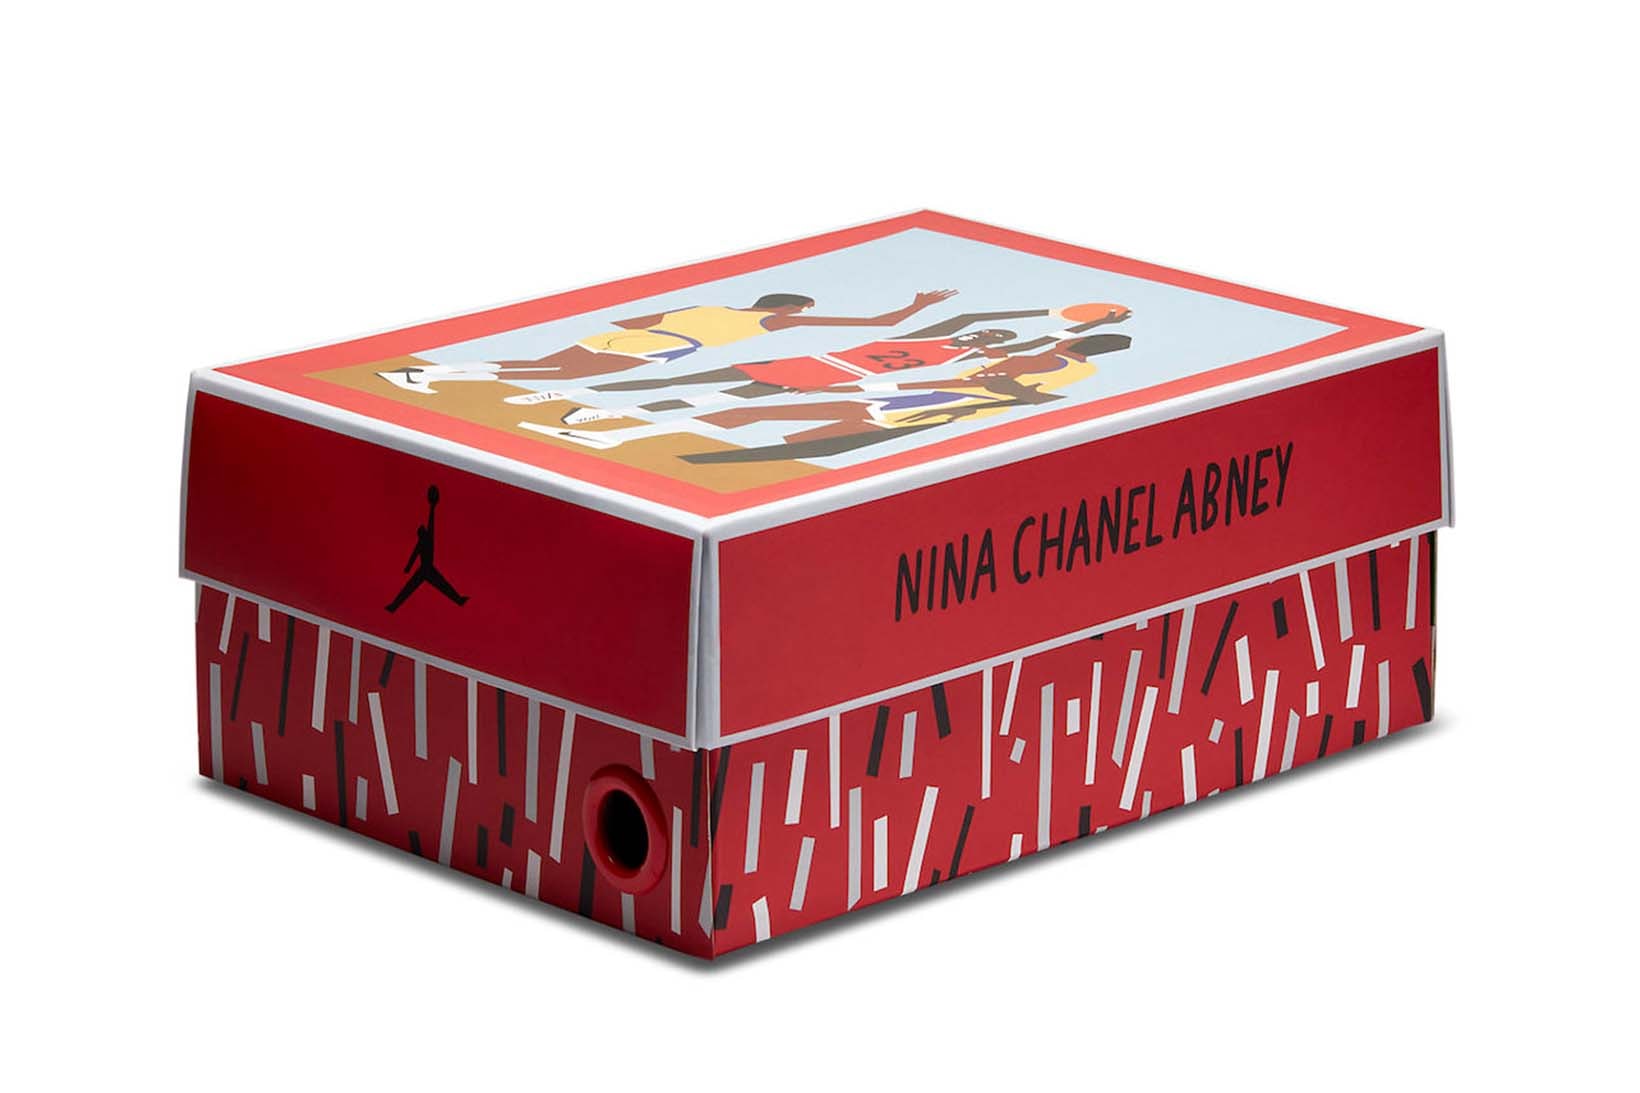 Nina Chanel Abney Air Jordan 2 Collaboration Price Release Date